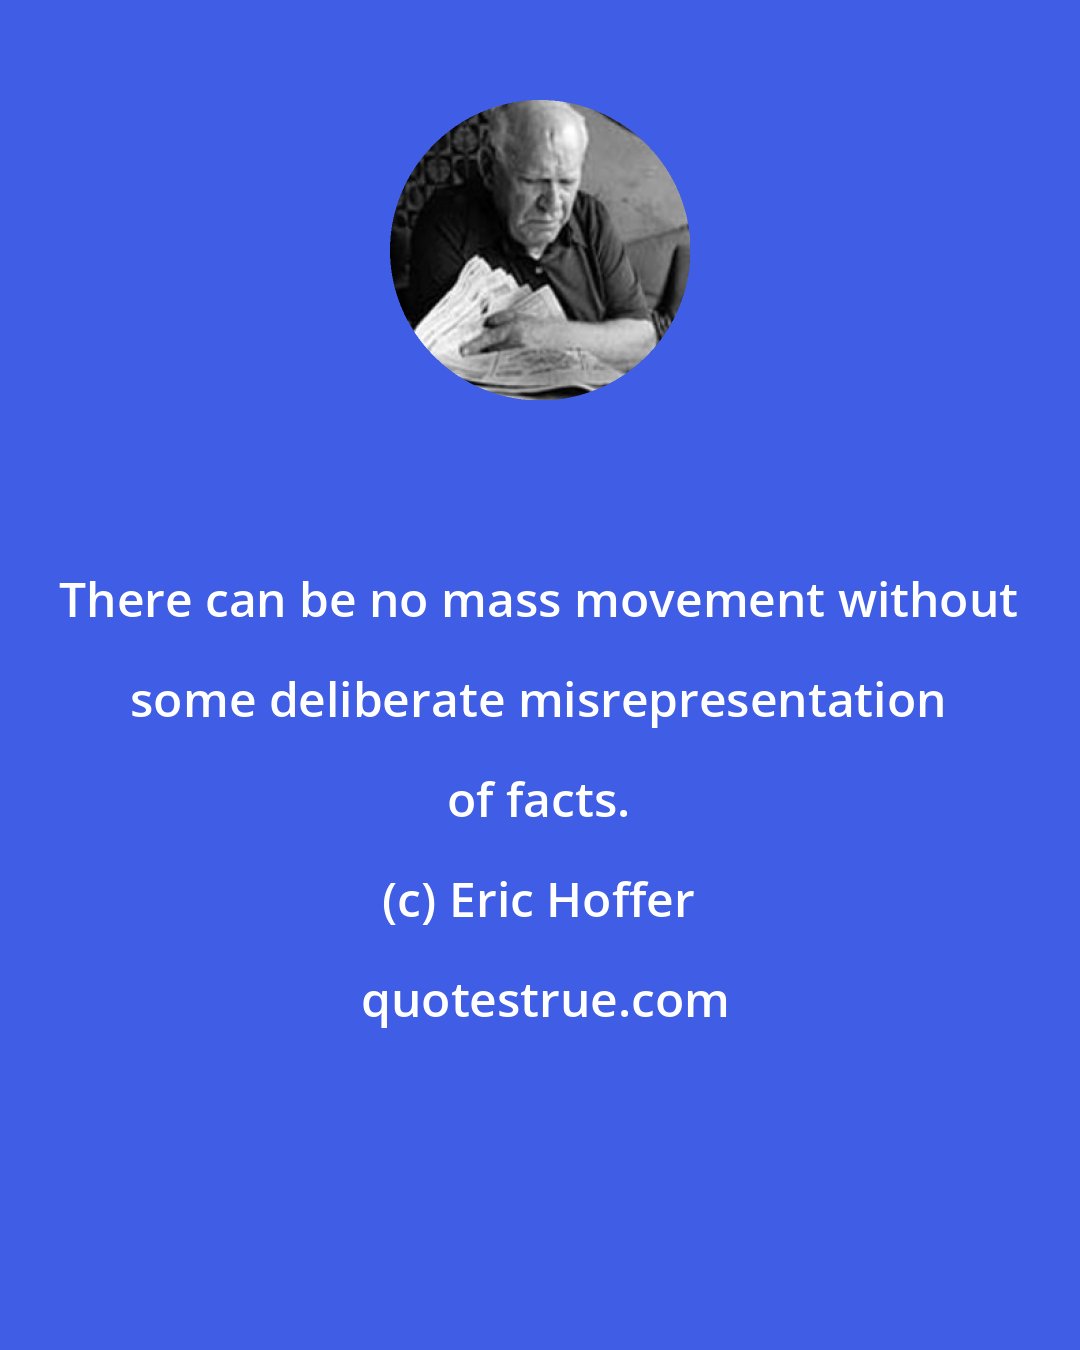 Eric Hoffer: There can be no mass movement without some deliberate misrepresentation of facts.